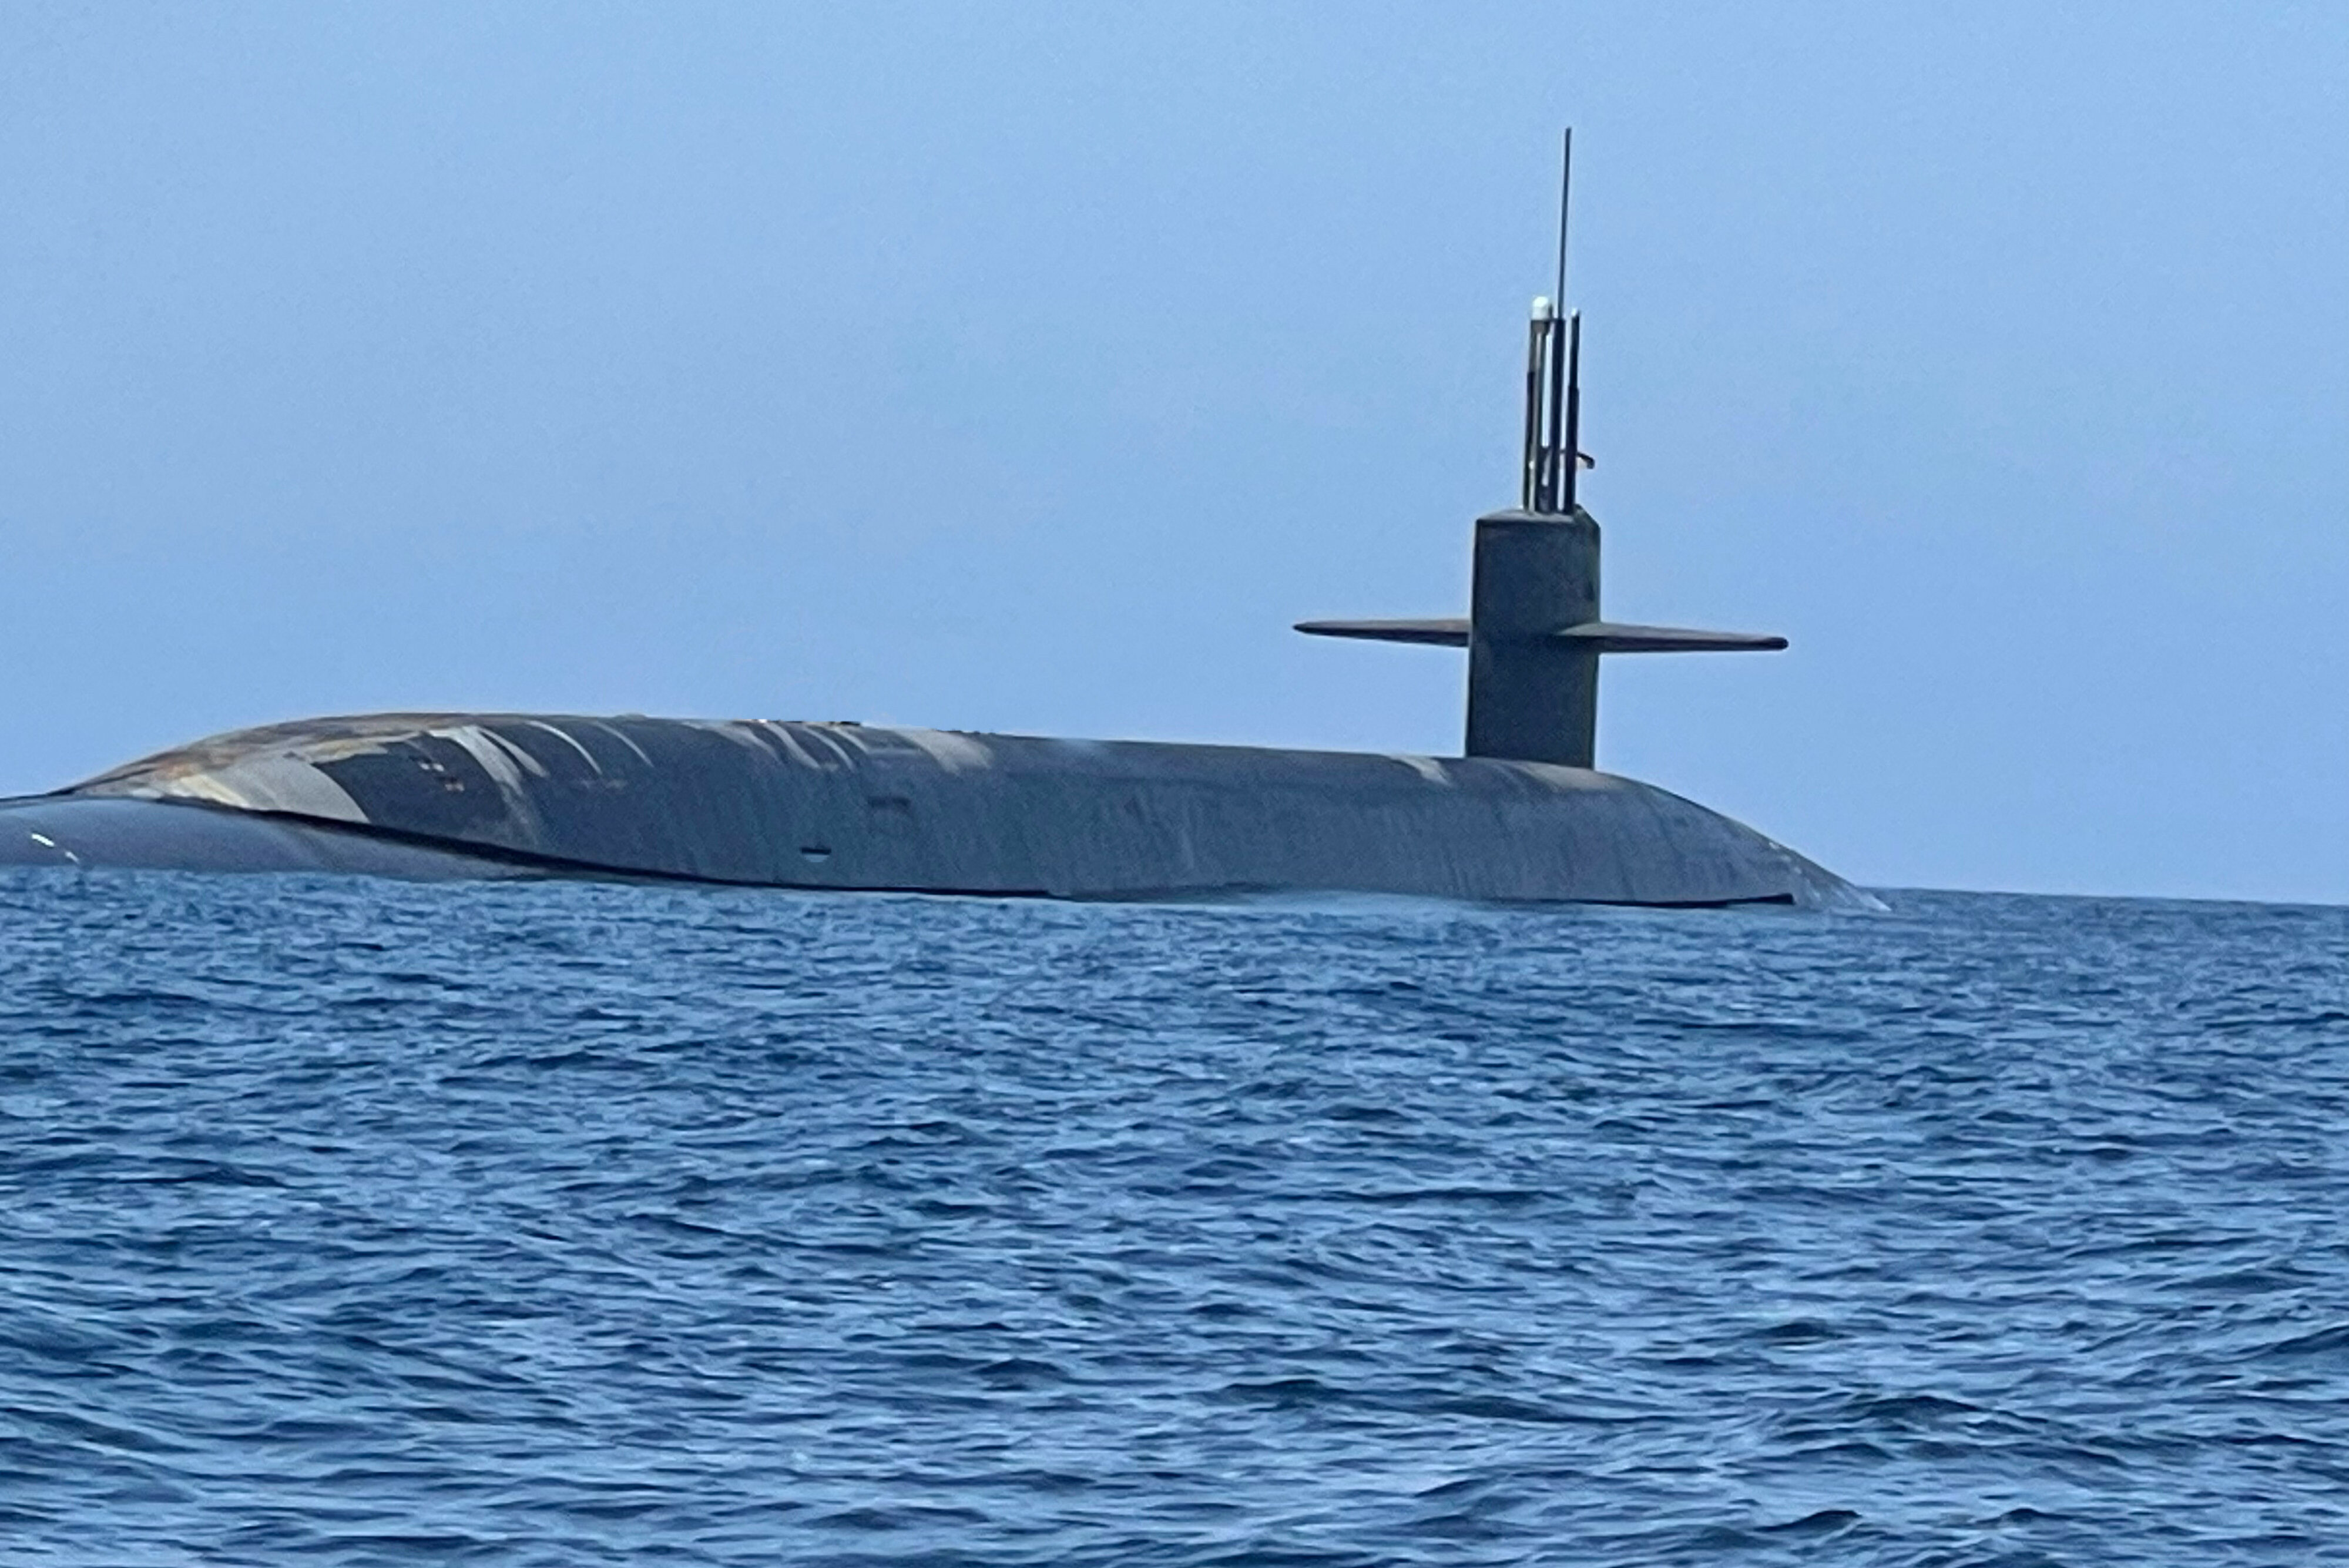 U.S. Commander Pays Rare Visit To Nuclear Submarine Near Iran Waters (Photos)